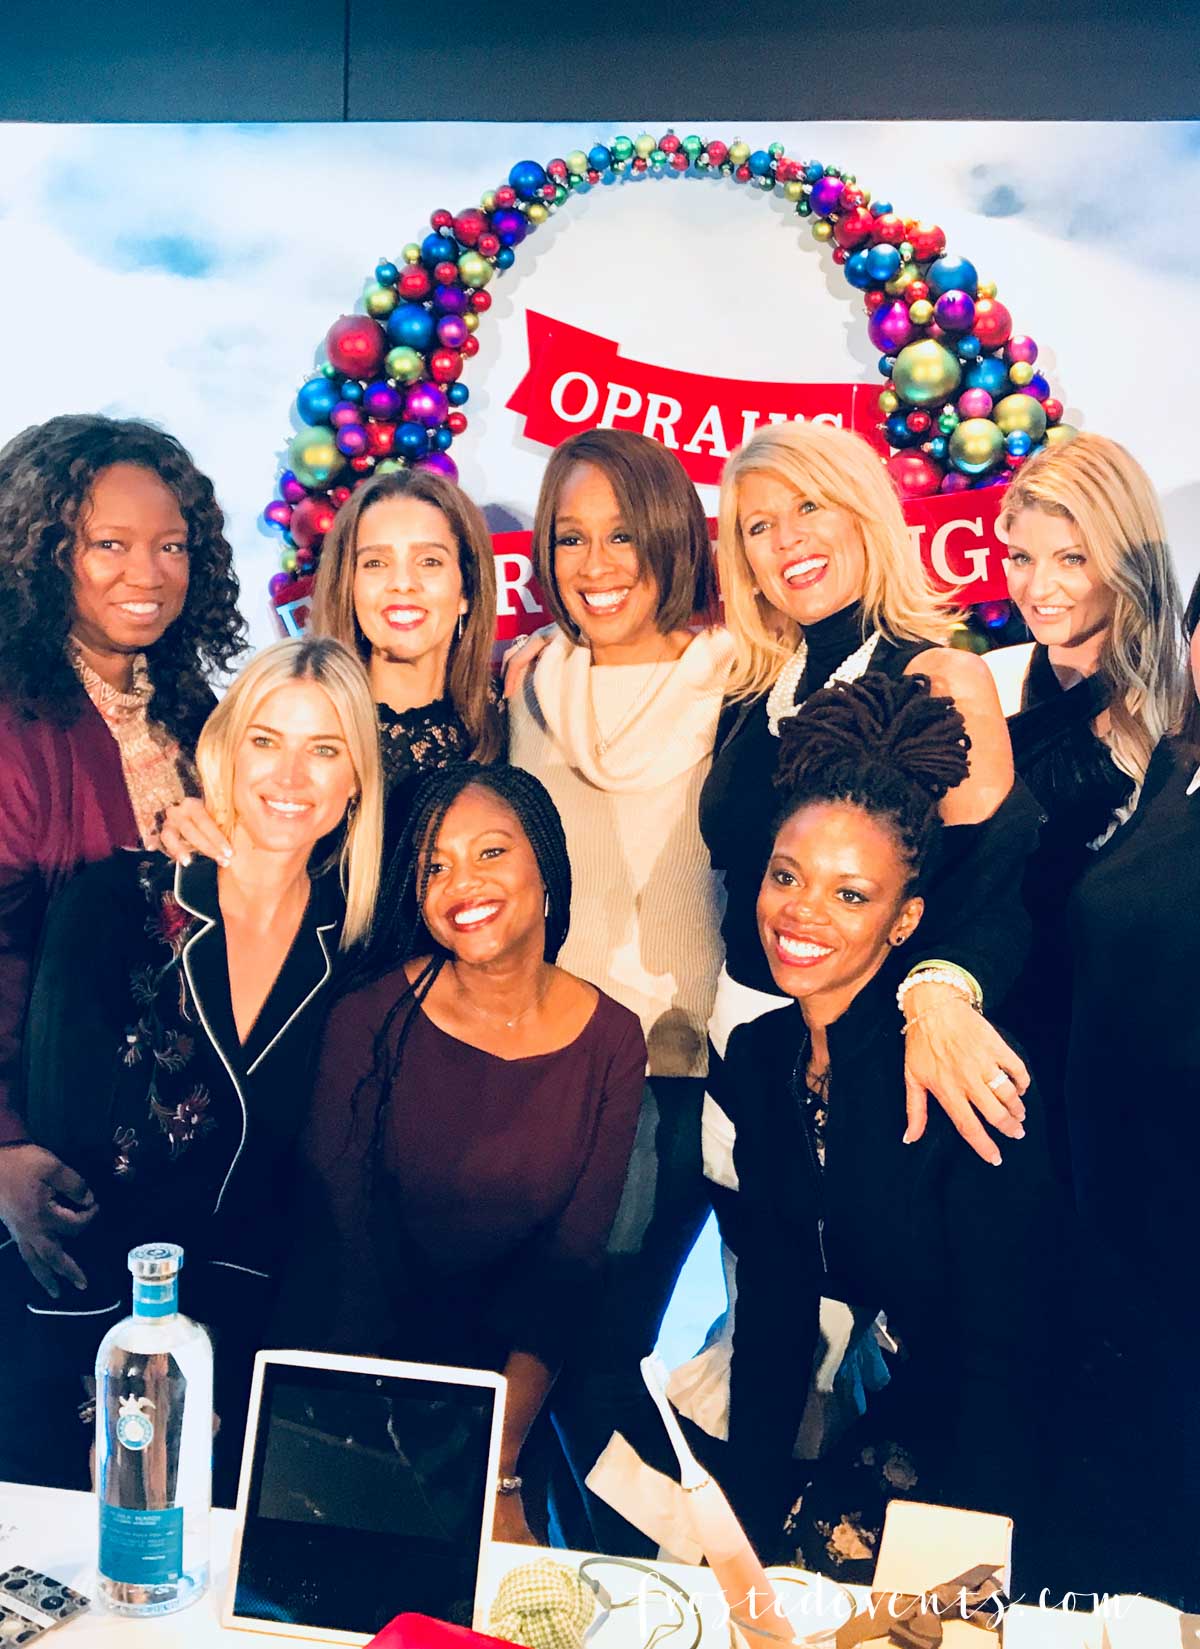 Oprah's Favorite Things 2017 party was last Thursday and I had the unbelievable opportunity to attend and reveal a very exciting secret I've been dying to share. Here's a look at what it's like to be a guest at the best holiday party ever!....  As an OMagazine Insider I get invited to participate in some pretty cool experiences. But never in my wildest dreams did I imagine that I would be invited to Oprah's Favorite Things party! Ya'll, I'm still completely in shock and covered in bruises from pinching myself about a million times. Oh, how I wish you could have seen the happy dance that I did when I opened the email invitation. It would be a viral video for sure. Something comparable to lottery ticket winners or Justin Beiber fans who find out they're going to get to meet the Biebs backstage. There was screaming, lots of screaming... and even tears of joy. Maybe wails of joy, sobs. Ok, I was a sobbing, wailing, ecstatic hot mess. It was truly that exciting! Here we are in the elevator on our way up to the party. I adore my  OMag Insiders tribe! It's such a wonderful group of inspiring ladies from all walks of life. They are creative, brilliant, funny, strong and successful as hell. But what really makes them special is the love and support they so generously share with each other. I'm so blessed to be a part of this family! My heart was racing as we made our way into the room. You could feel the buzz of excitement walking in, a mix of media and marketers, executives and a few celebrities too! Our fabulous elf Cara guided us to our table by the stage before giving us a mini tour of the party. A cocktail bar featuring Oprah's favorite tequila, Casa Dragones was serving up drinks at the back. Guests were taking pics with the life-size replica of the December O Magazine photo stand-in. I grabbed a cocktail, some nibbles from the delicious food spread and a cupcake (or two!) and mingled a bit before the show began. Gayle King and Adam Glassman were our hosts for the evening, taking the stage to reveal the list of holiday gifts Oprah hand selected for this years list. They uncovered the first box and explained why Oprah chose this gift and how she goes about choosing all the gifts. And then Adam said the magic words.... 